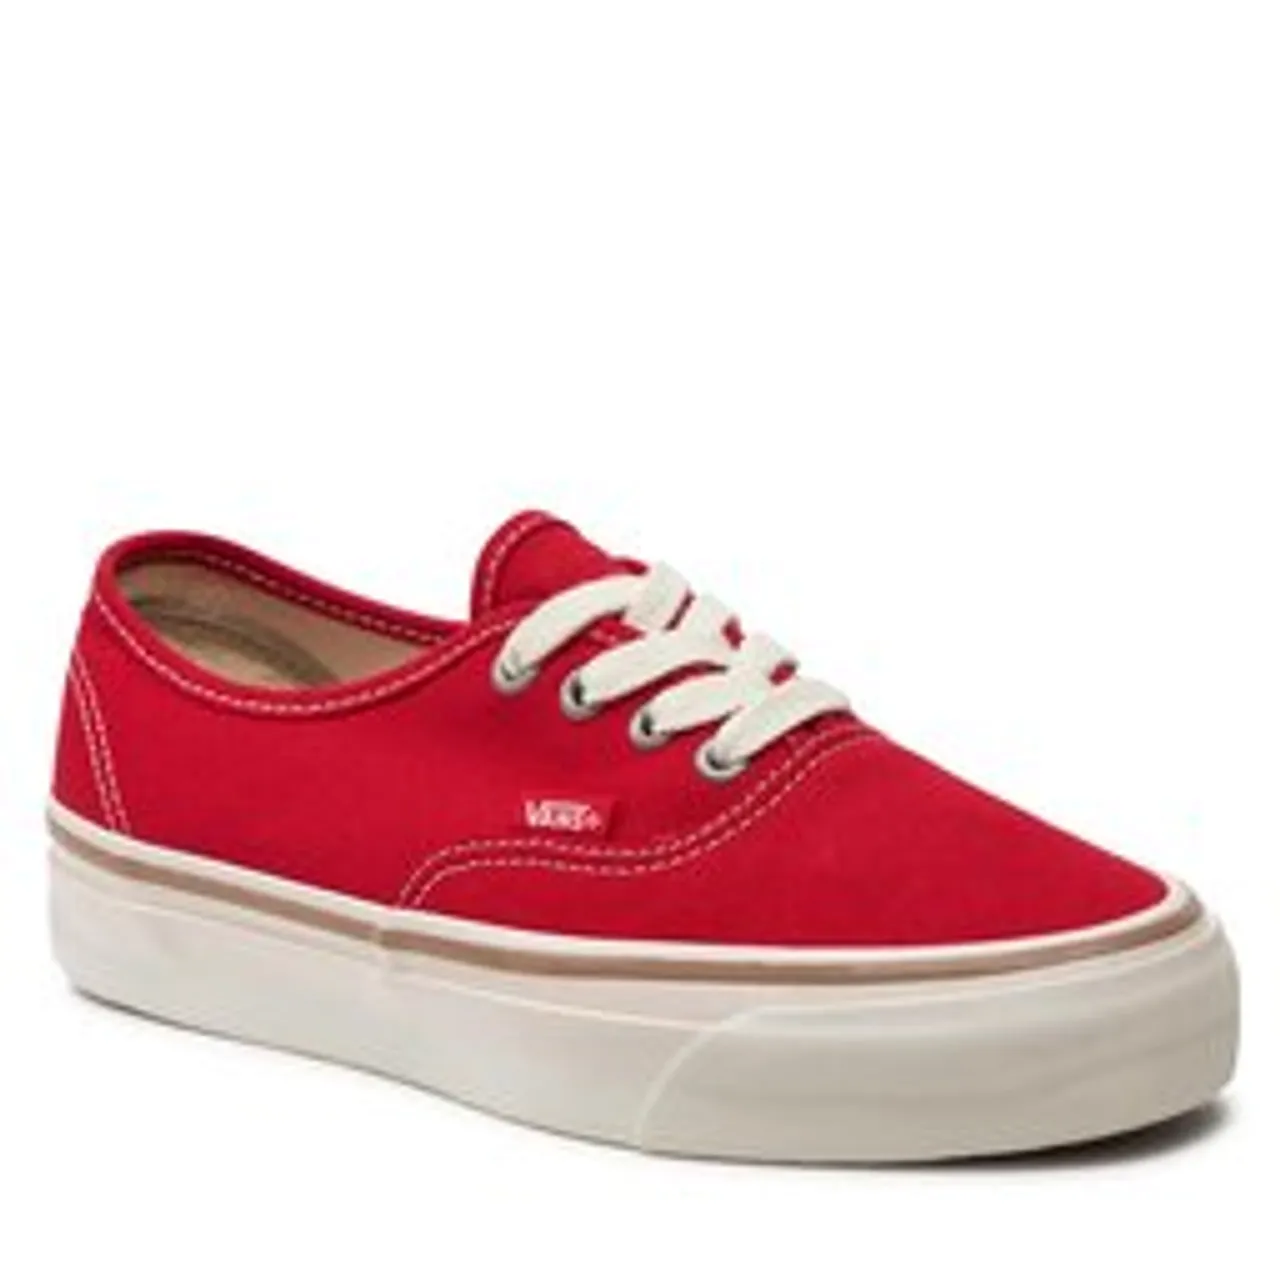 Sneakers aus Stoff Vans Mte Authentic Reissue 44 VN000CT7BOP1 Racing Red/Marshmallow